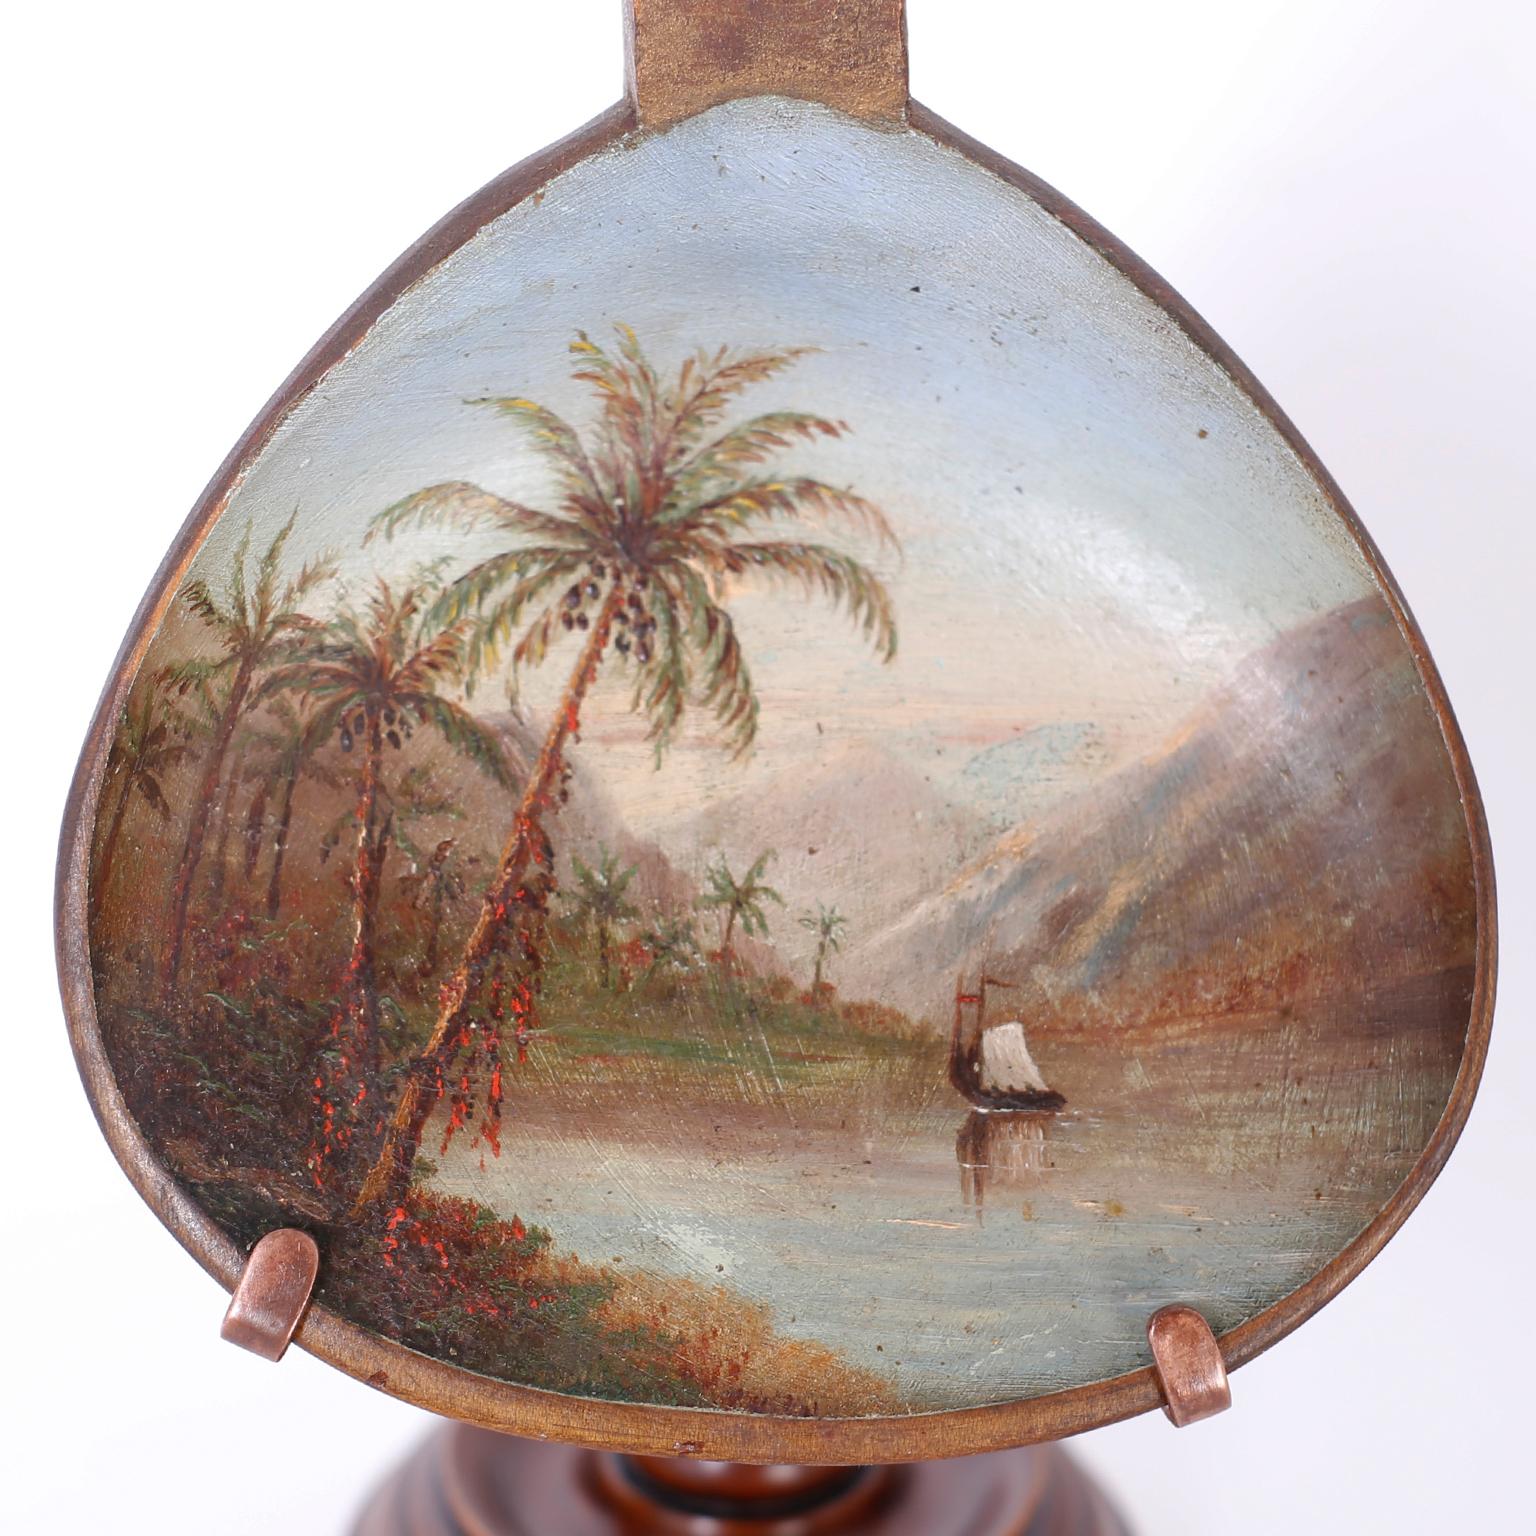 Rare and unusual antique grain scoop crafted in indigenous hard wood and expertly decorated with a sophisticated tropical oil painting of palm trees, mountains, water and a sail boat, mounted on a custom stand.